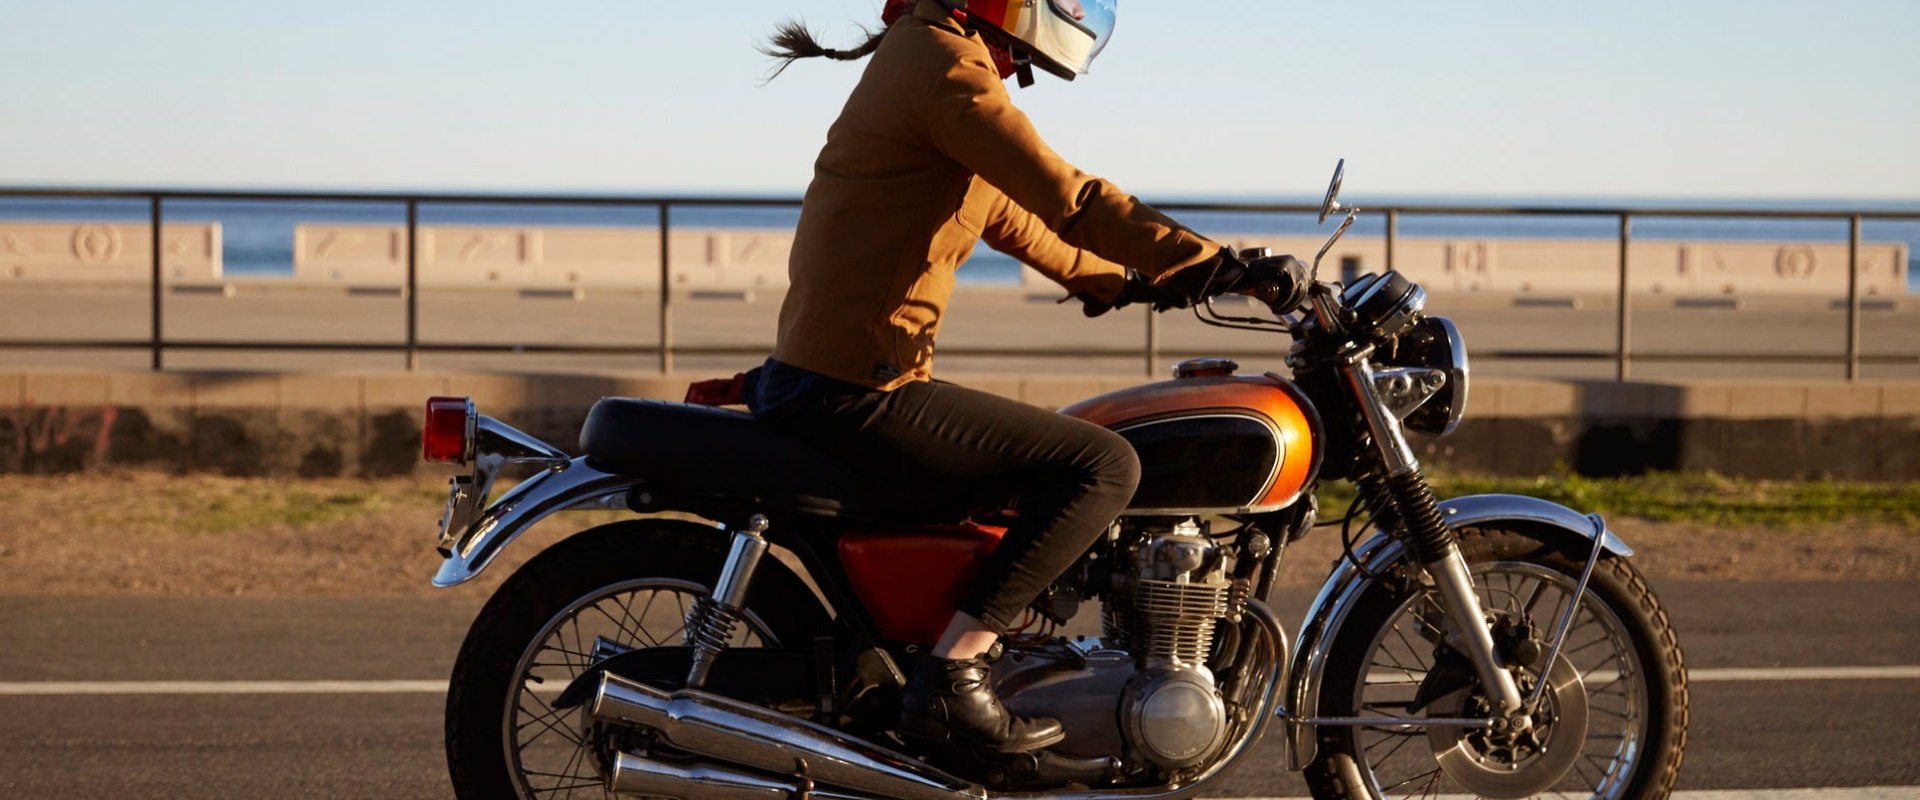 Financing and Insurance for Maryland Motorcycle Dealers